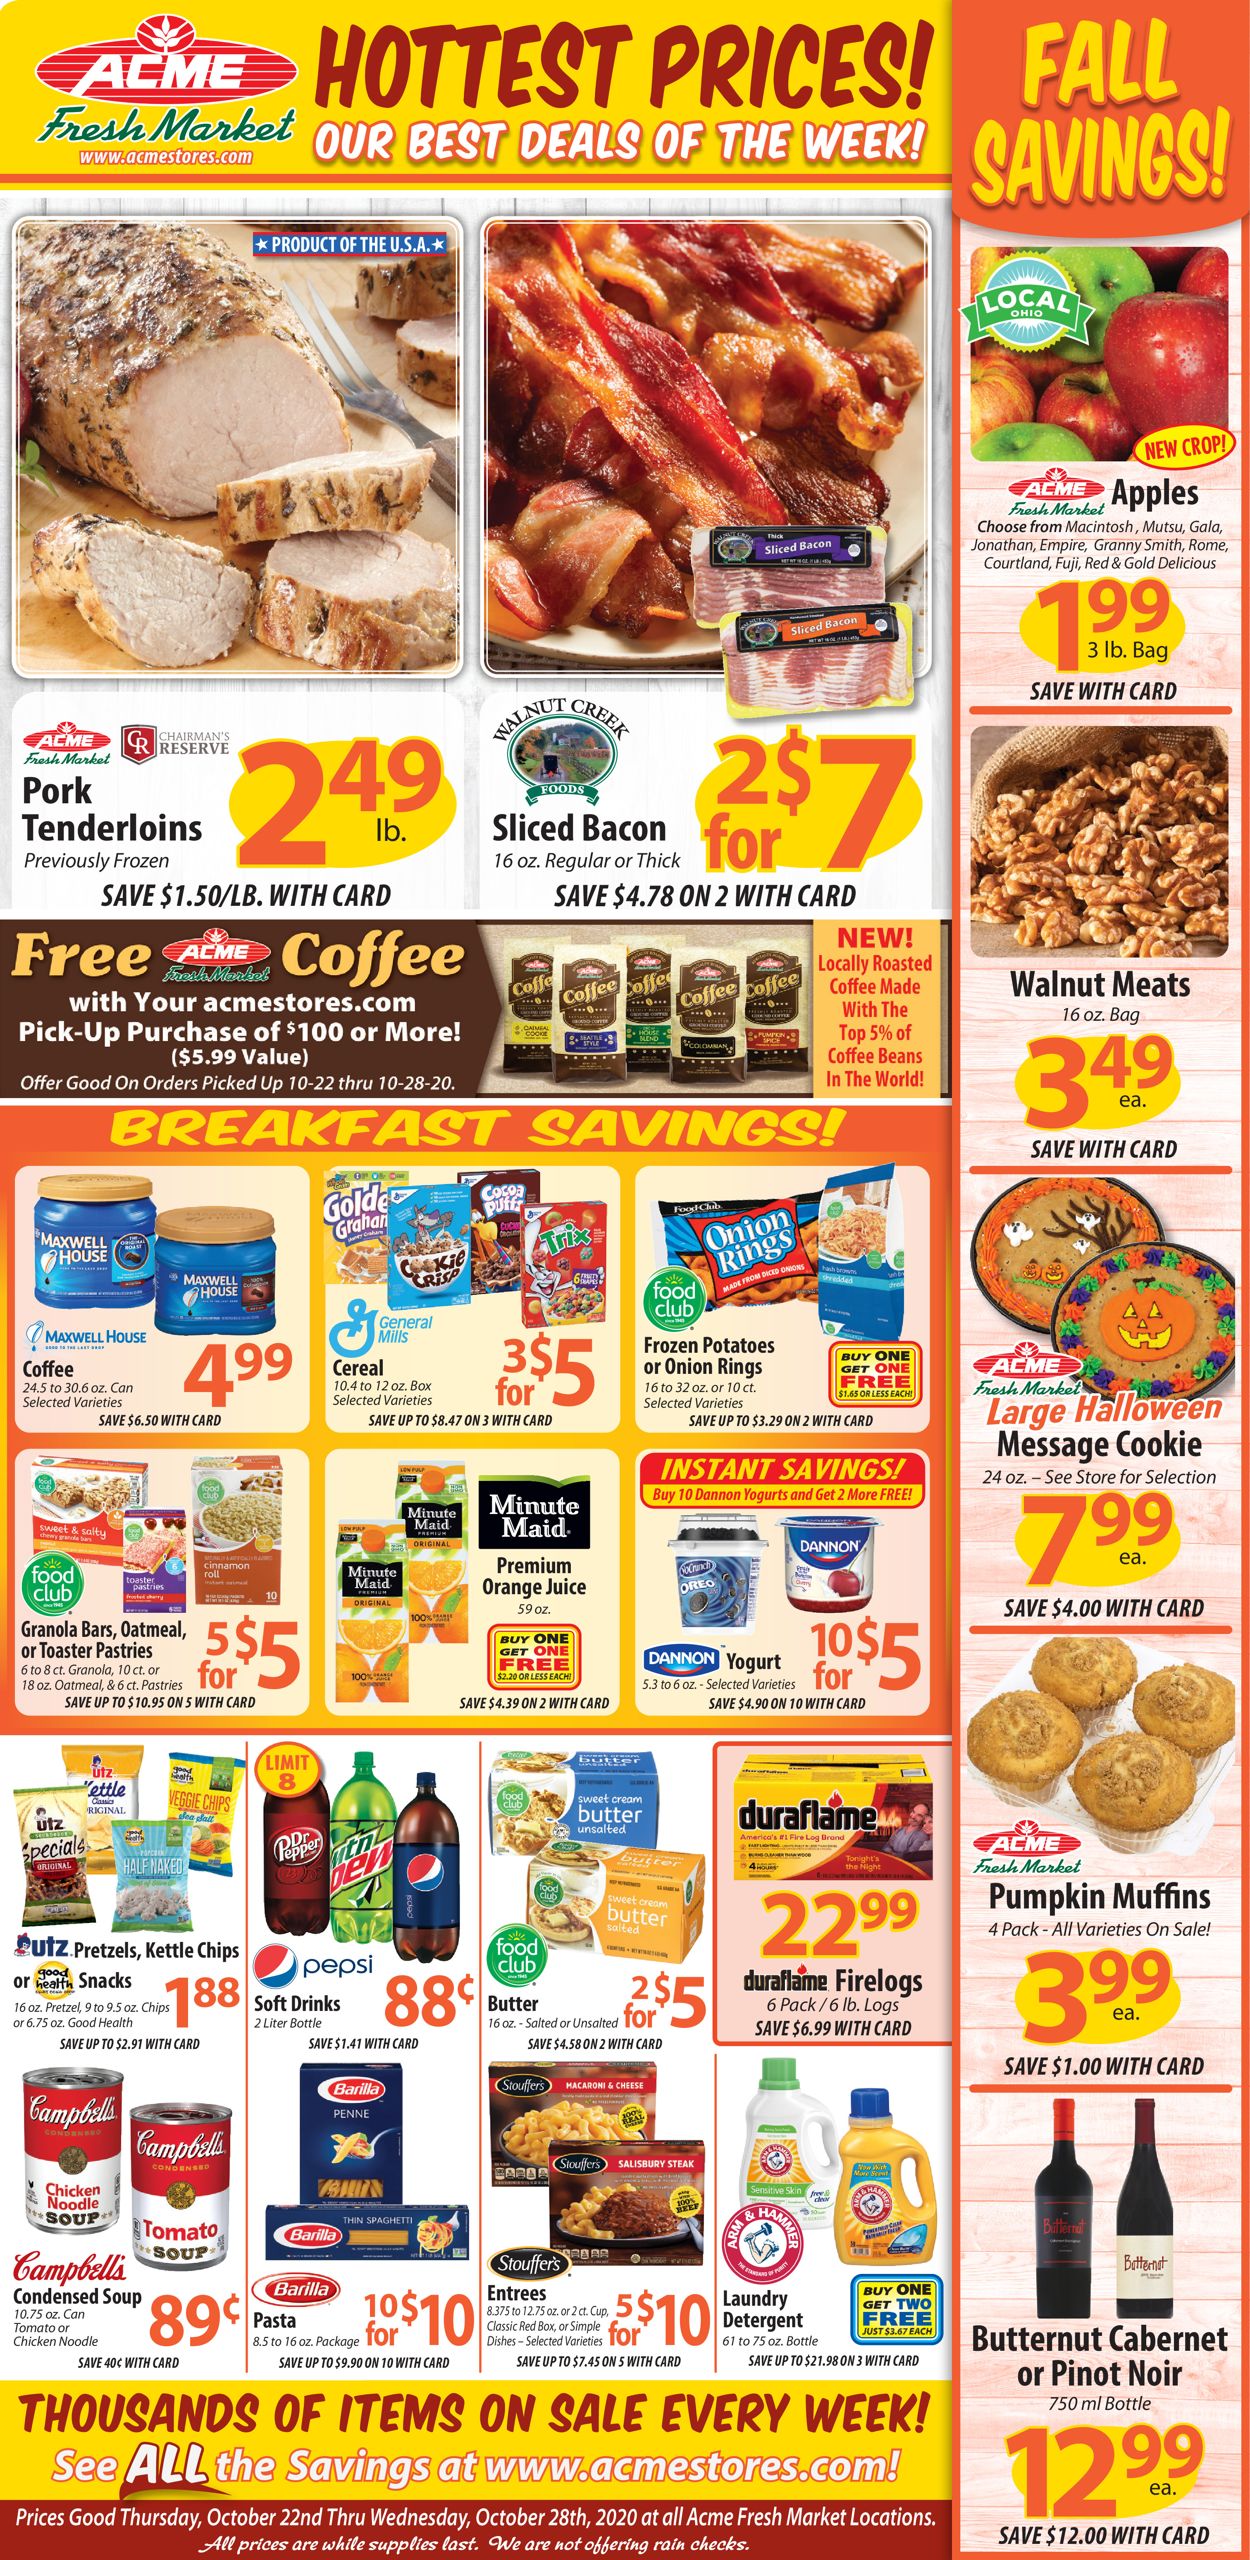 Acme Fresh Market Current weekly ad 10/22 - 10/28/2020 - frequent-ads.com